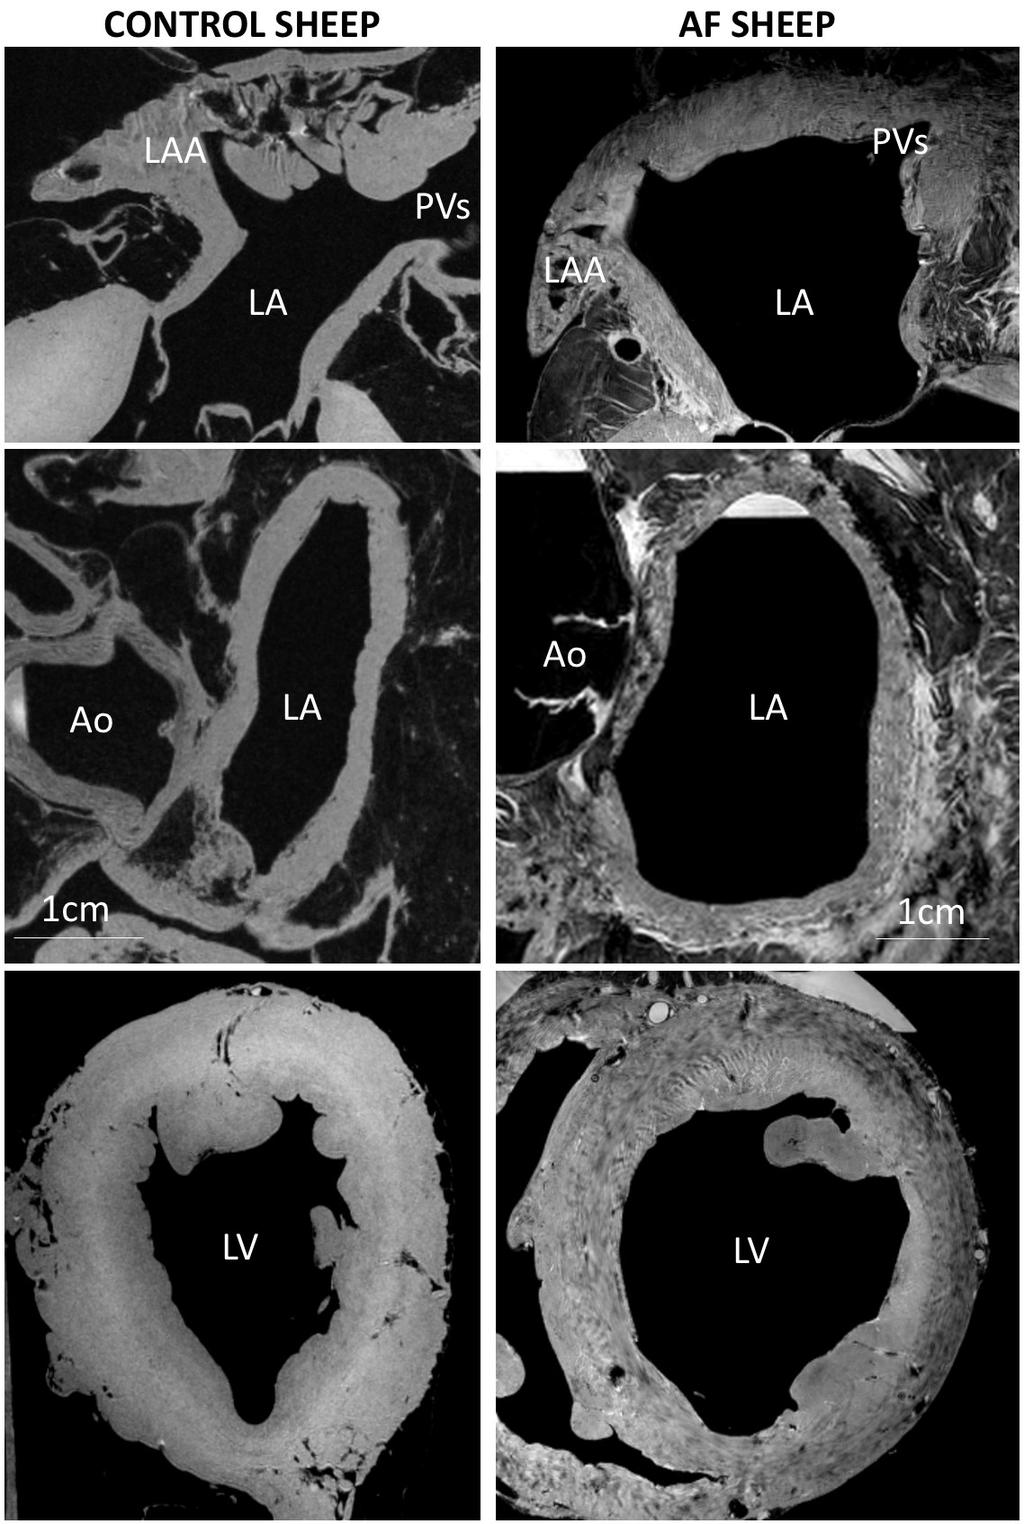 in ctl. Conclusion: High-field MRI reveals early atrial and ventricular structural remodeling in a sheep model of persistent AF.